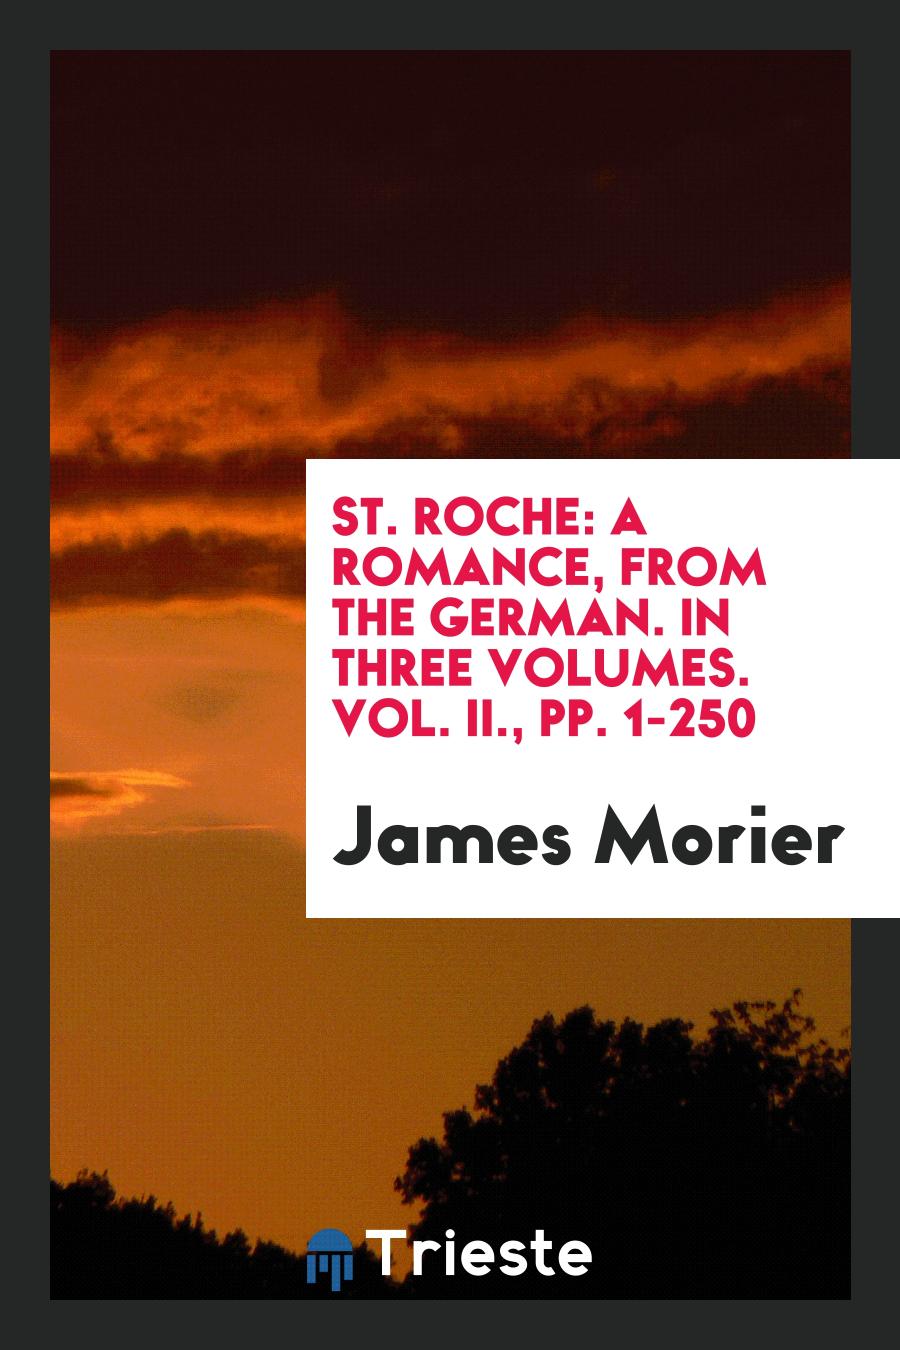 St. Roche: A Romance, from the German. In Three Volumes. Vol. II., pp. 1-250